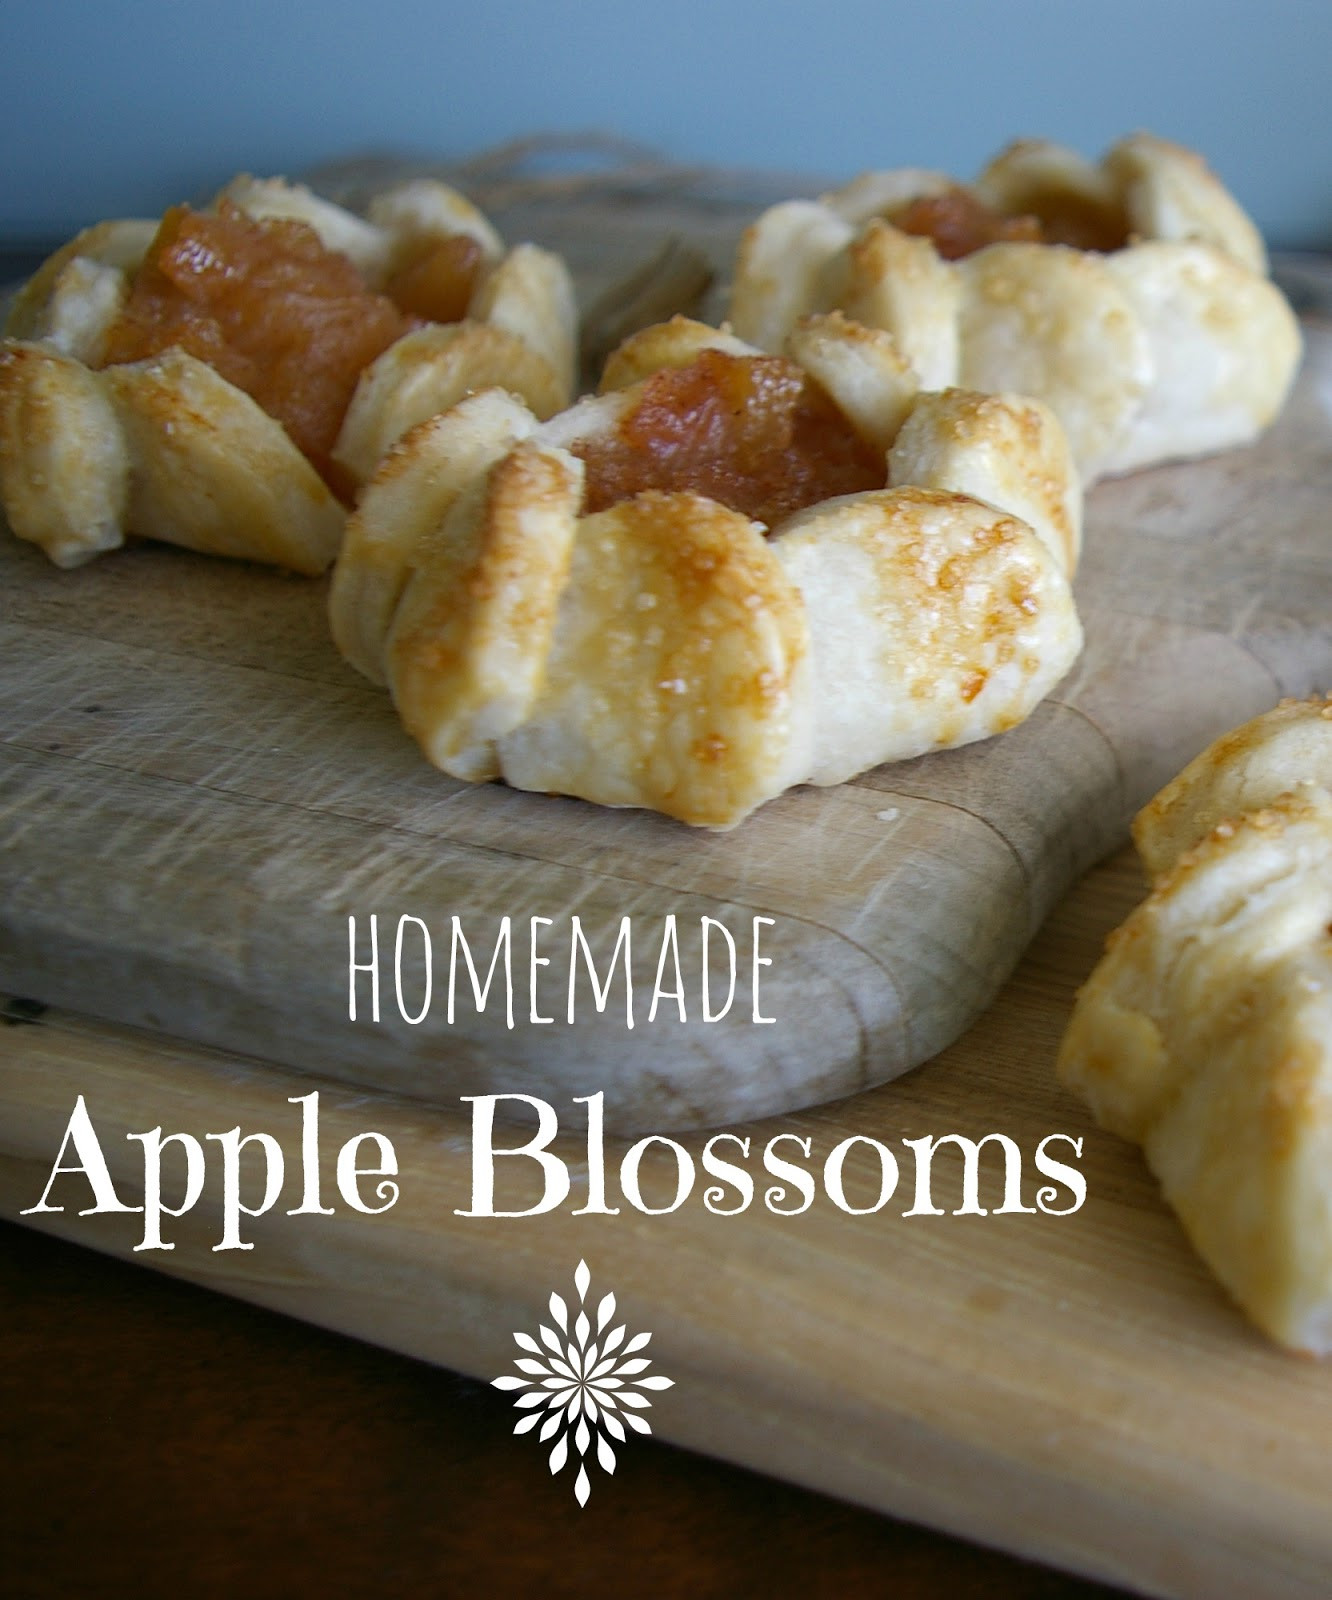 Apple Blossom Dessert
 Emmy in her Element Homemade Apple Blossoms and my